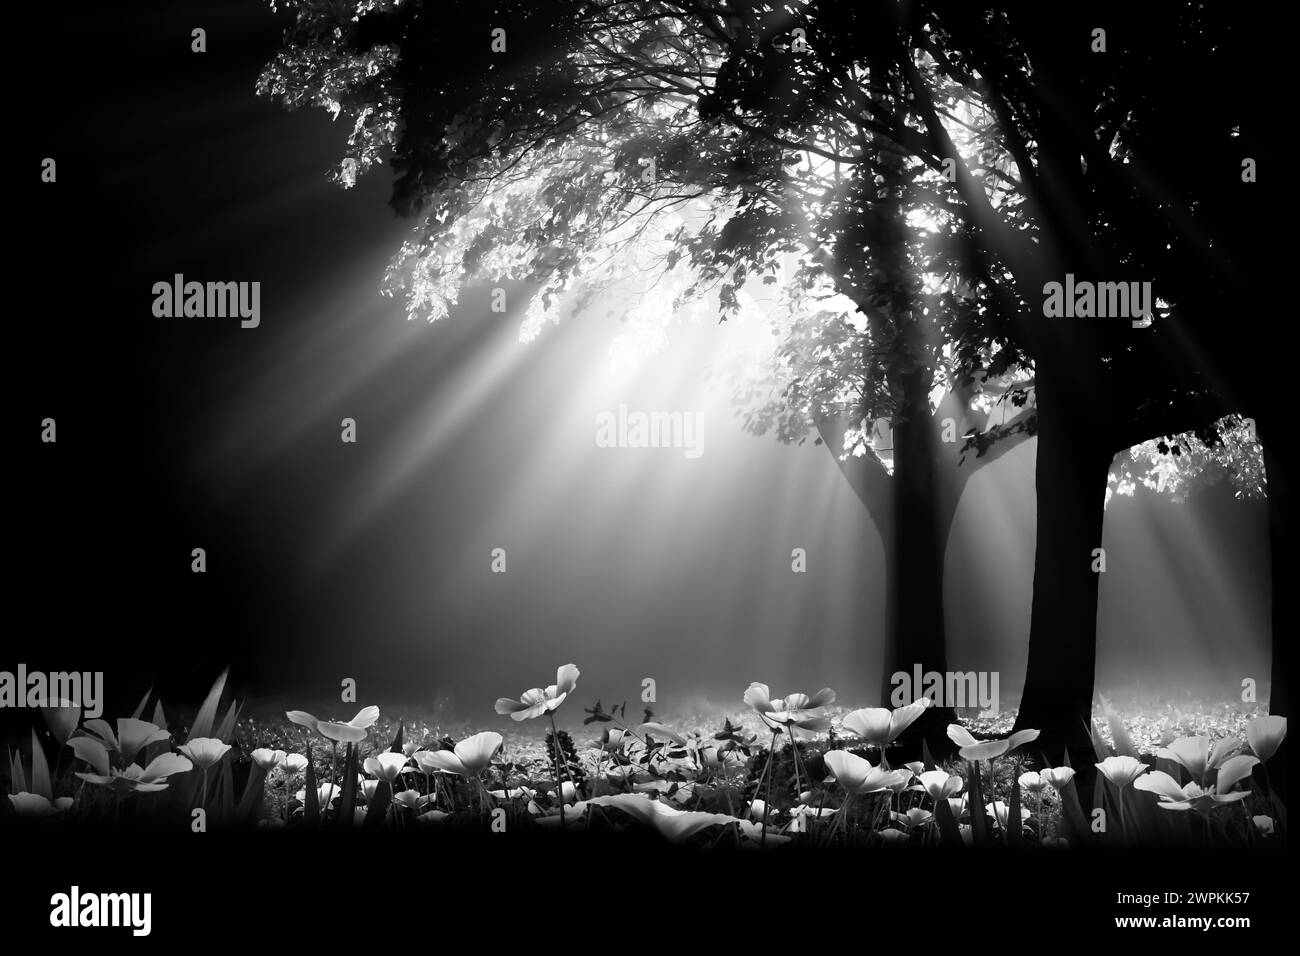 NIght light glowing through tree in artistic black and white and spring flowers under the tree landscape. Monotone artwork in Norfolk UK Stock Photo